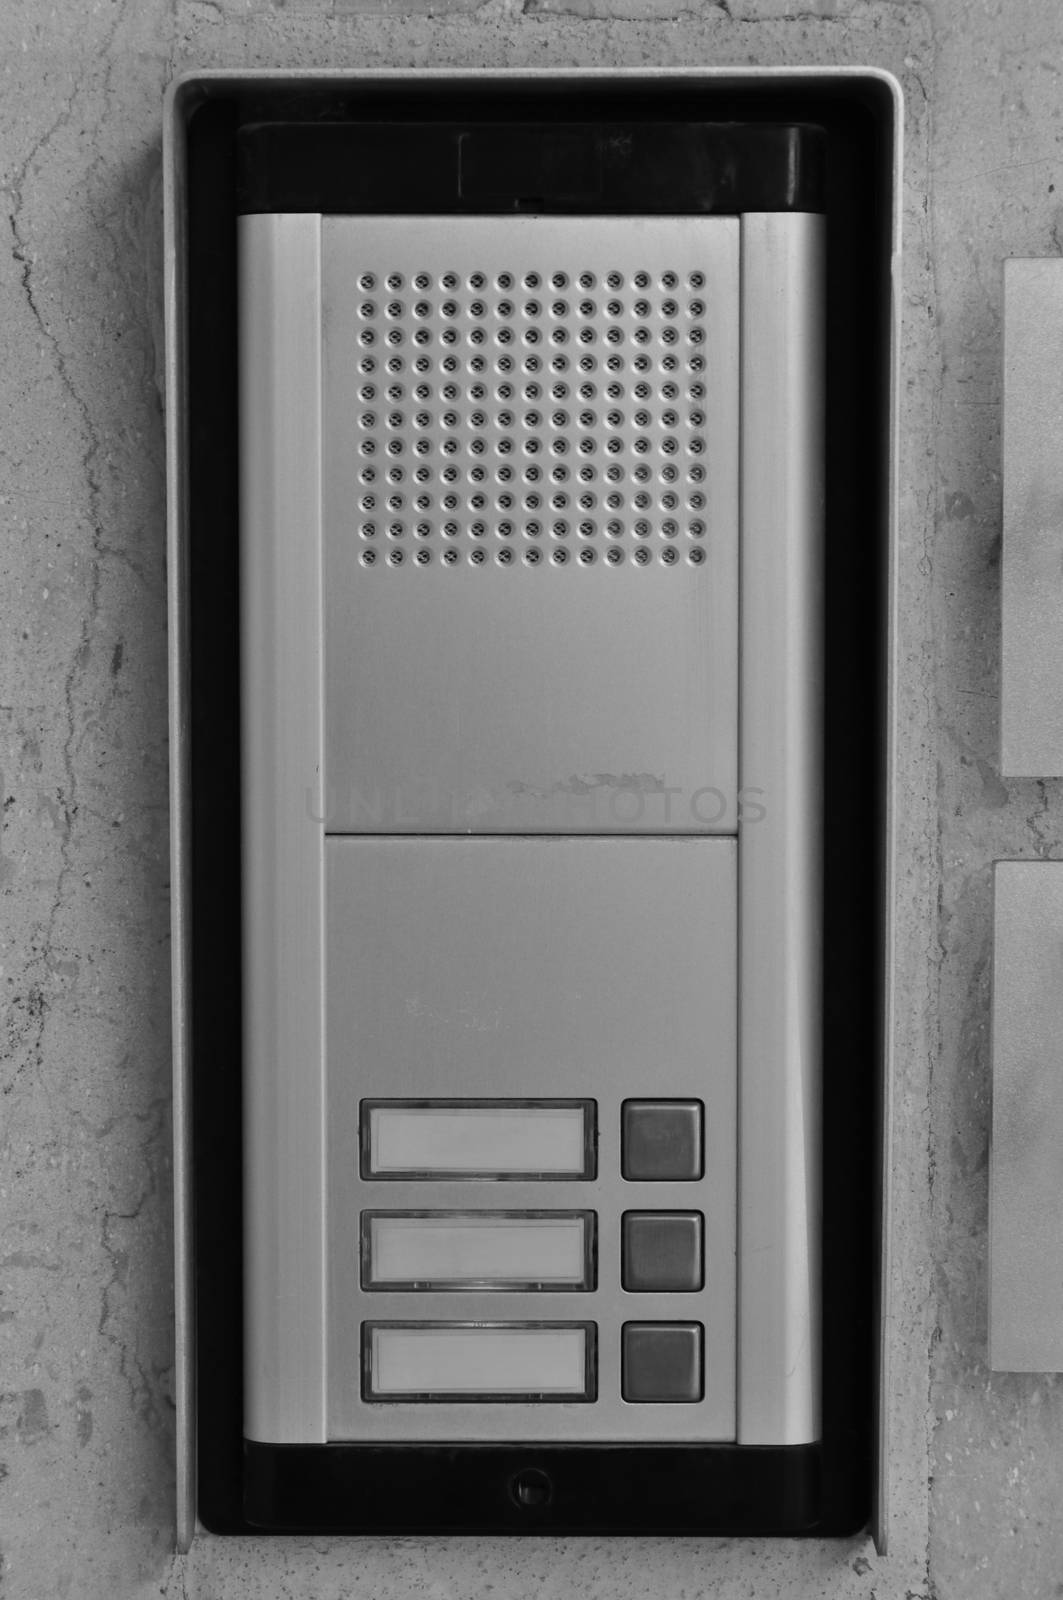 Doorphone intercom doorbell with buttons and speaker. Black and white.